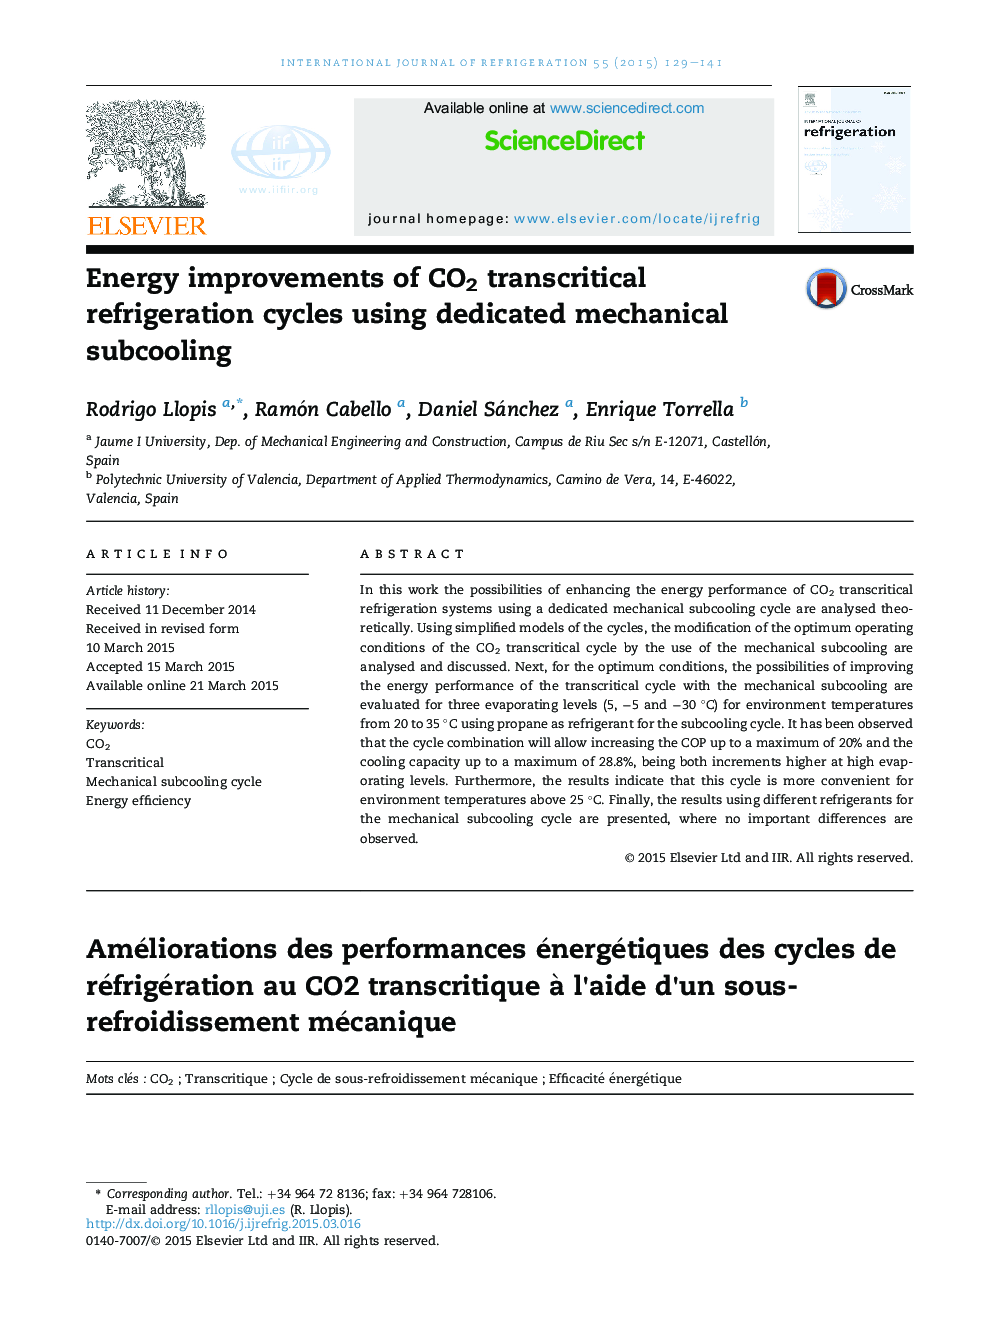 Energy improvements of CO2 transcritical refrigeration cycles using dedicated mechanical subcooling